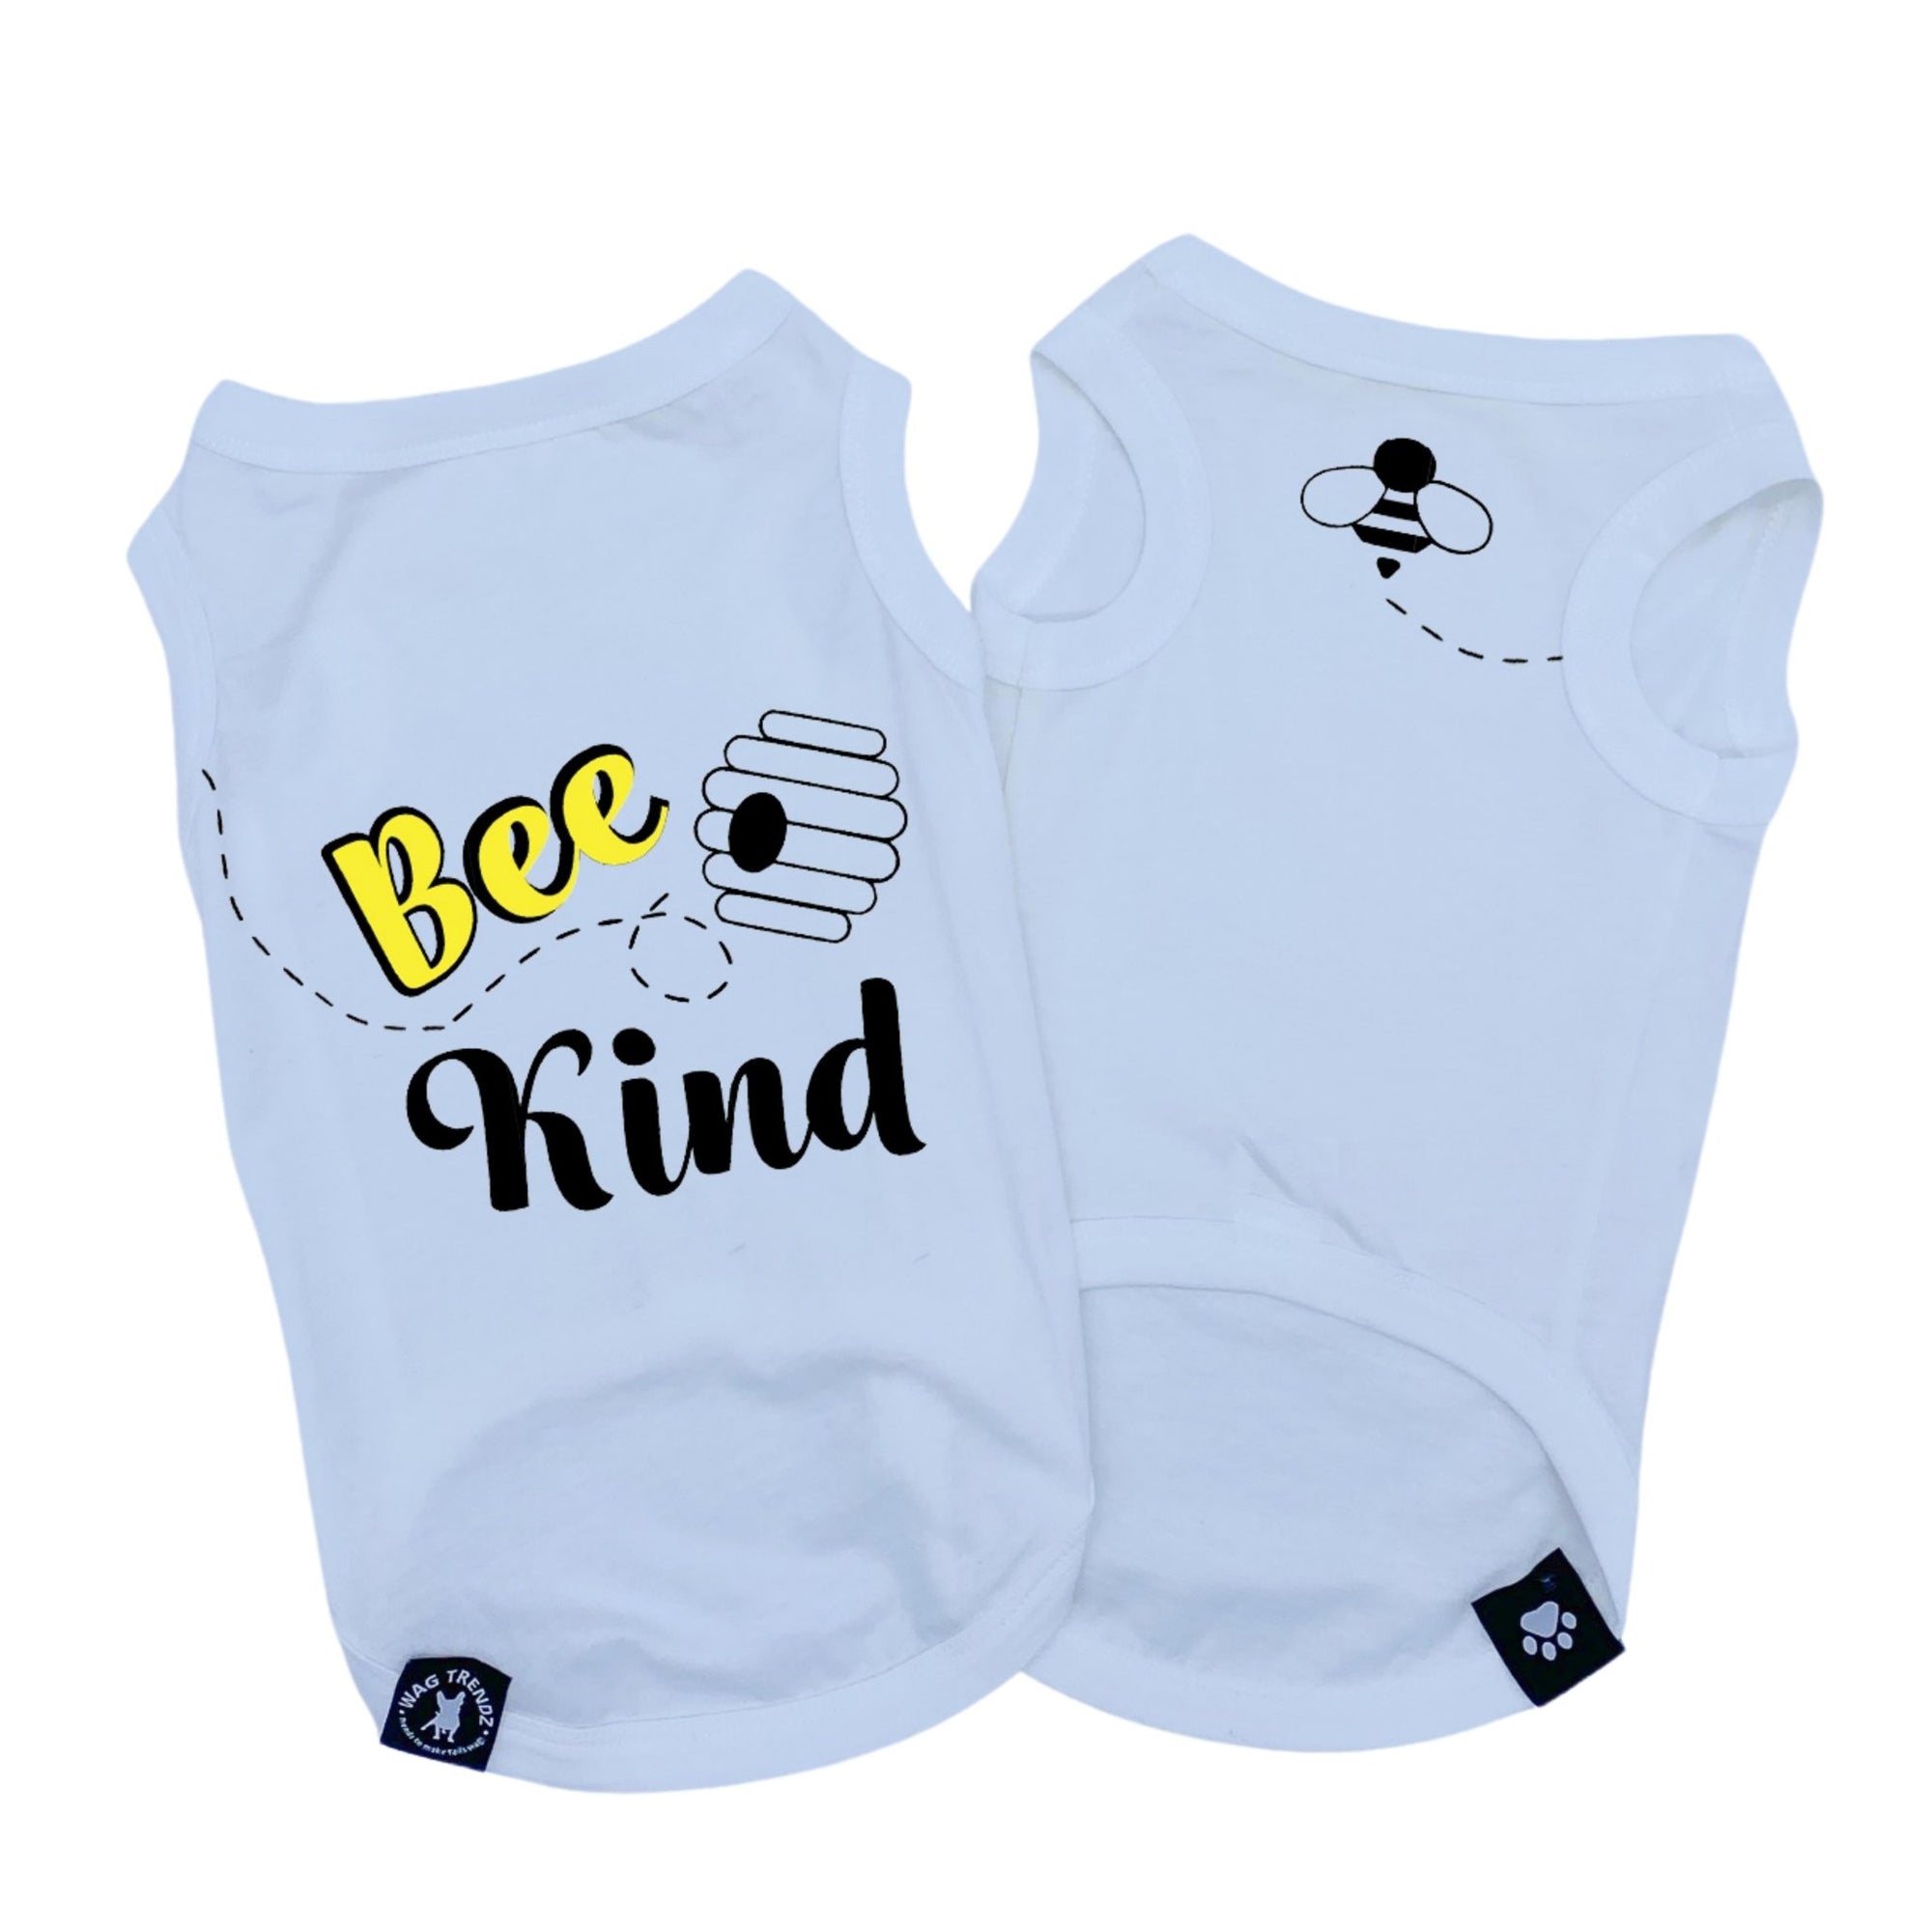 Dog T-Shirt - &quot;Bee Kind&quot; - White set with back of bee hive and front chest of swarming bee emoji in yellow and black lettering - against solid white background - Wag Trendz